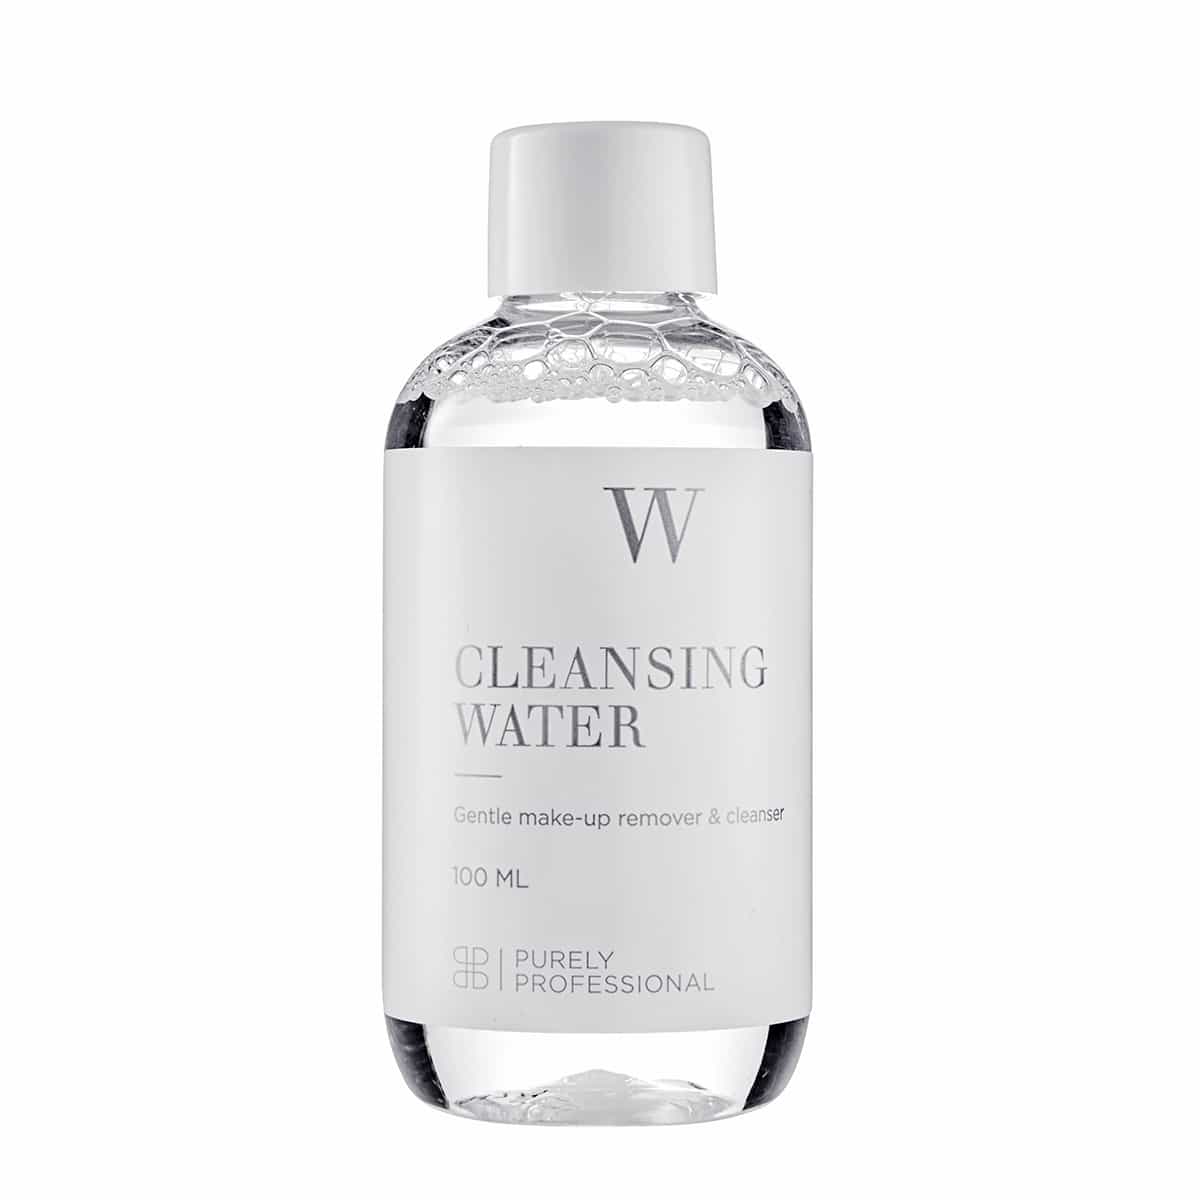 purely-professional-cleansing-water-100-ml.jpg